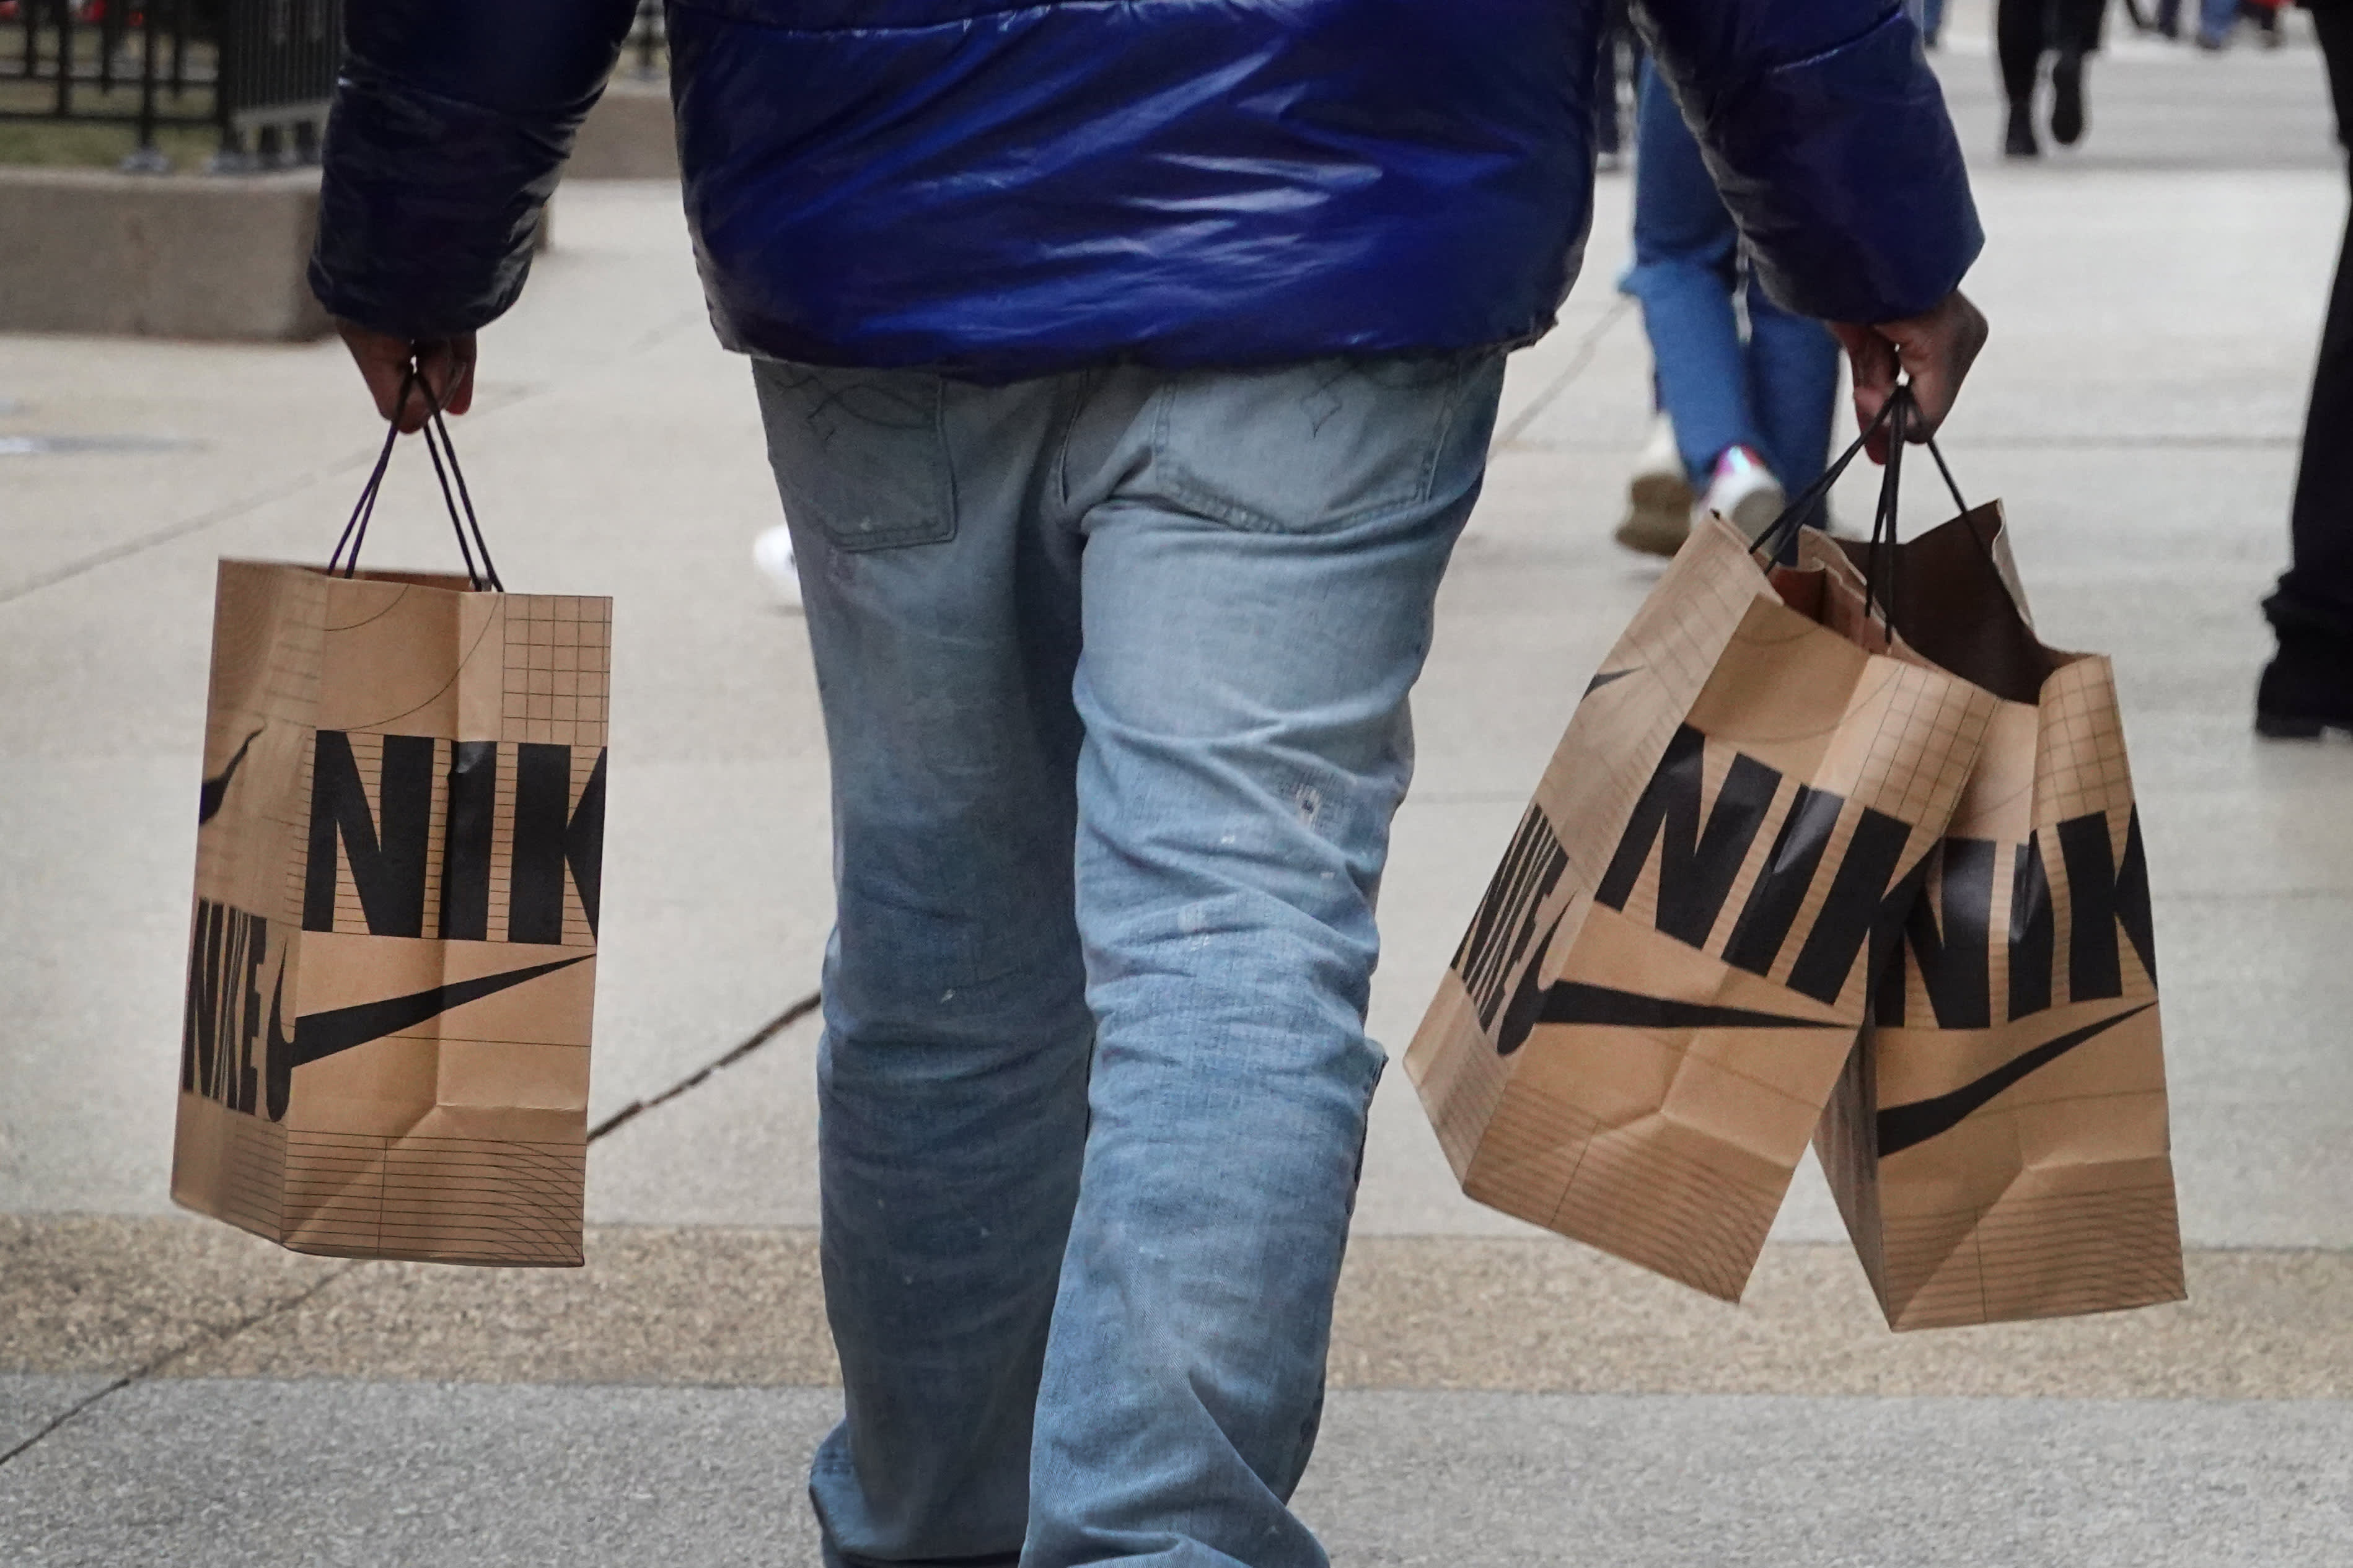 Nike to trade lower following Foot Locker's dismal results, Citi says